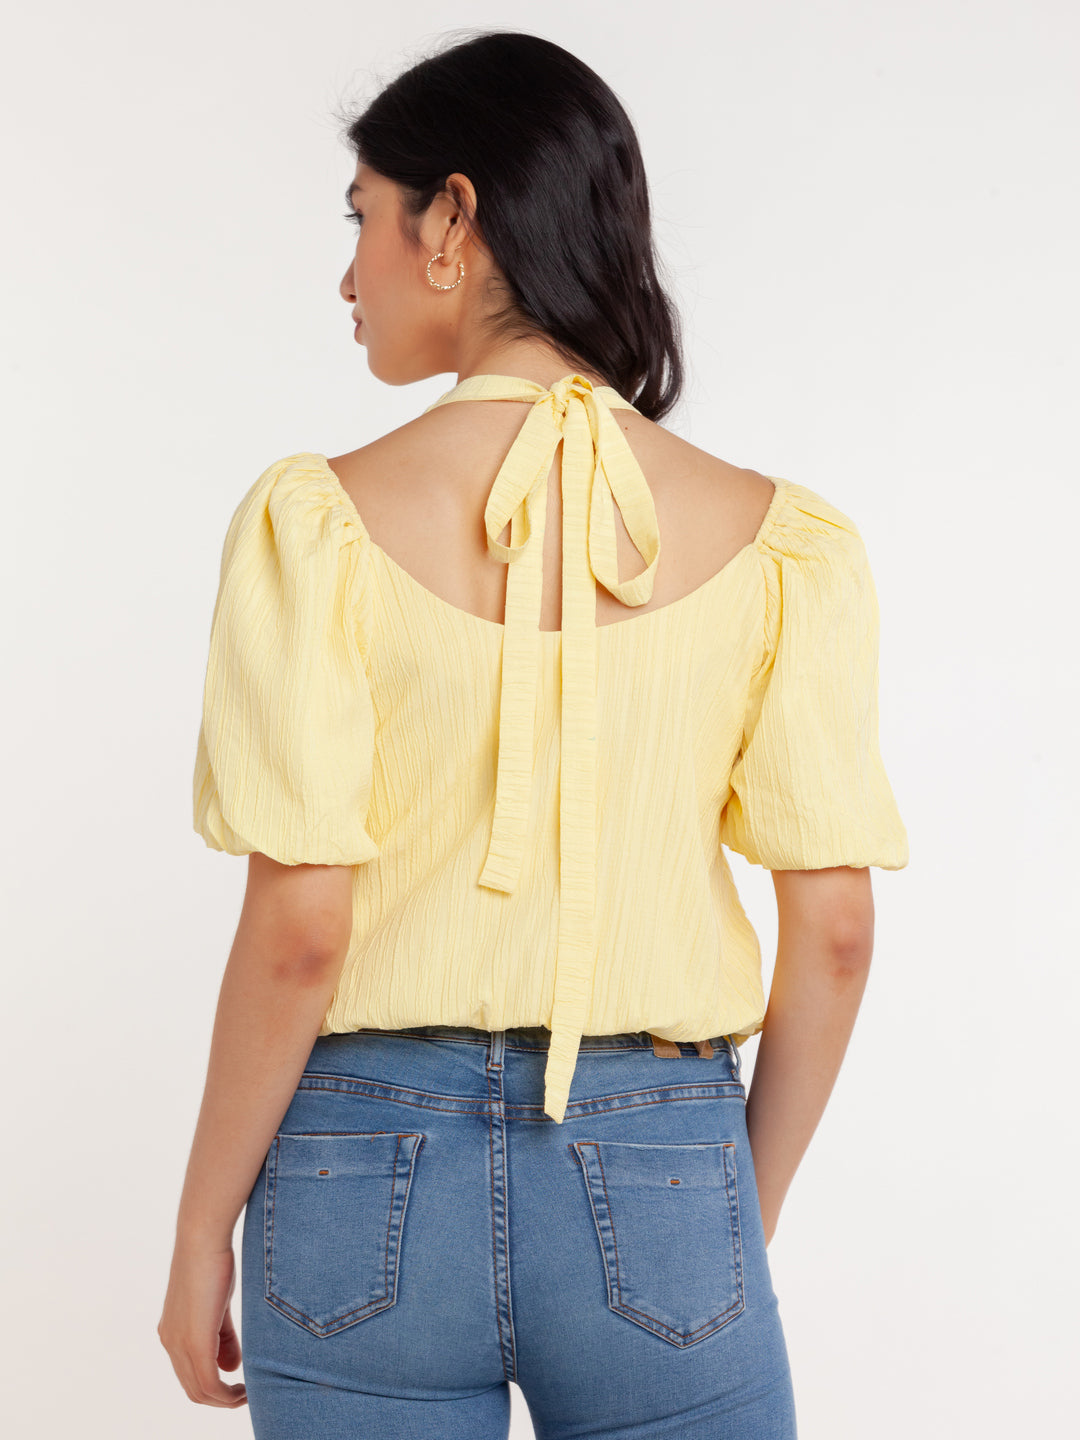 Yellow Solid Cutout Top For Women